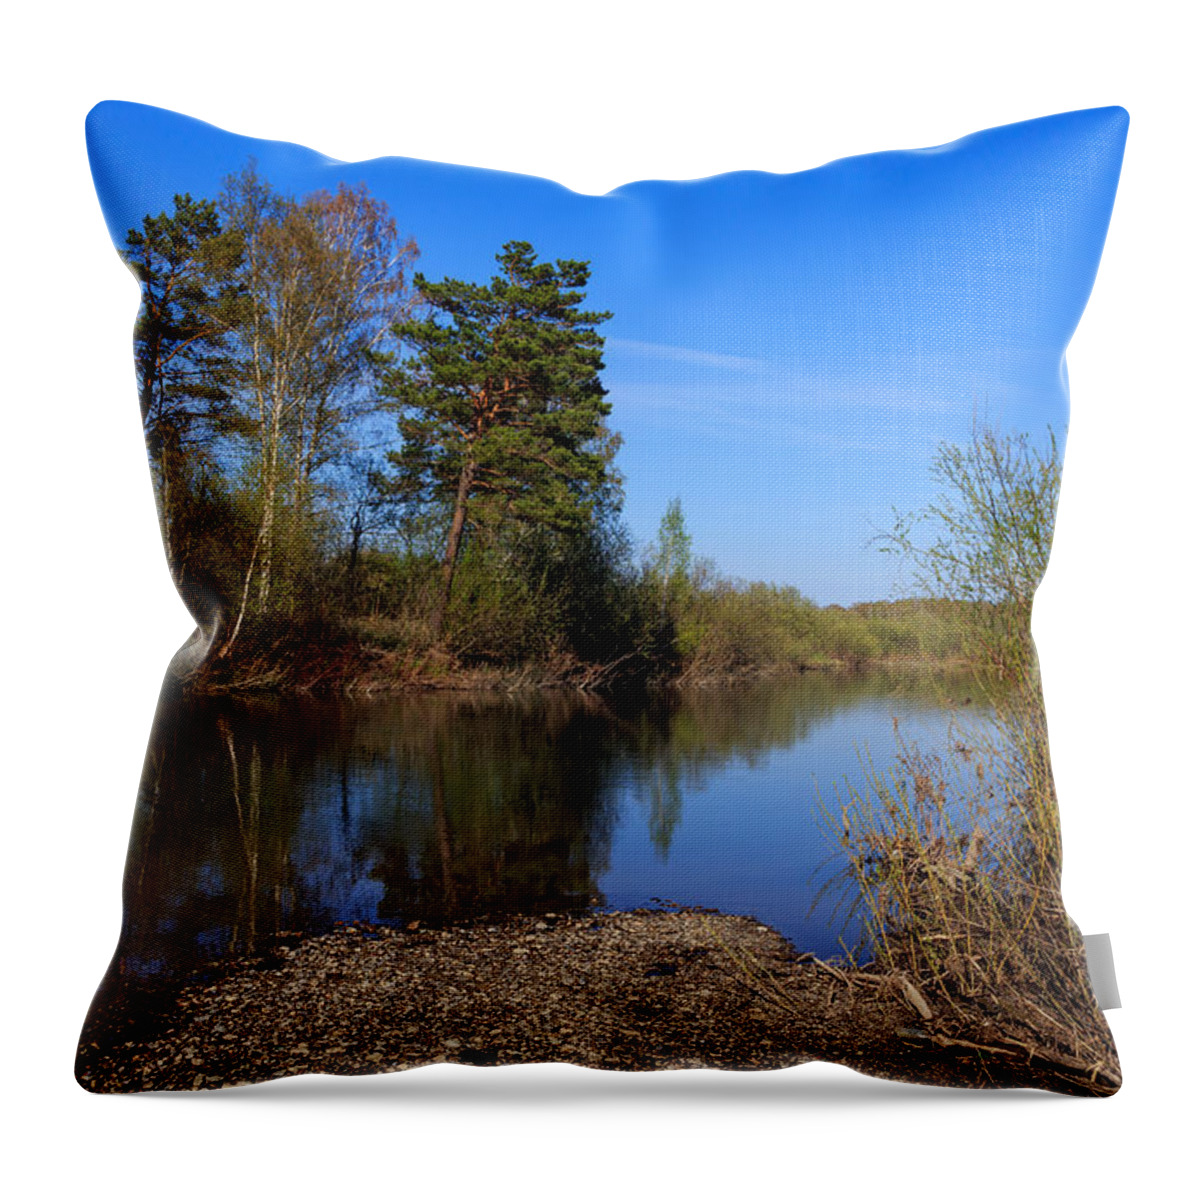 Landscape Throw Pillow featuring the photograph Swan River at Urga District by Victor Kovchin